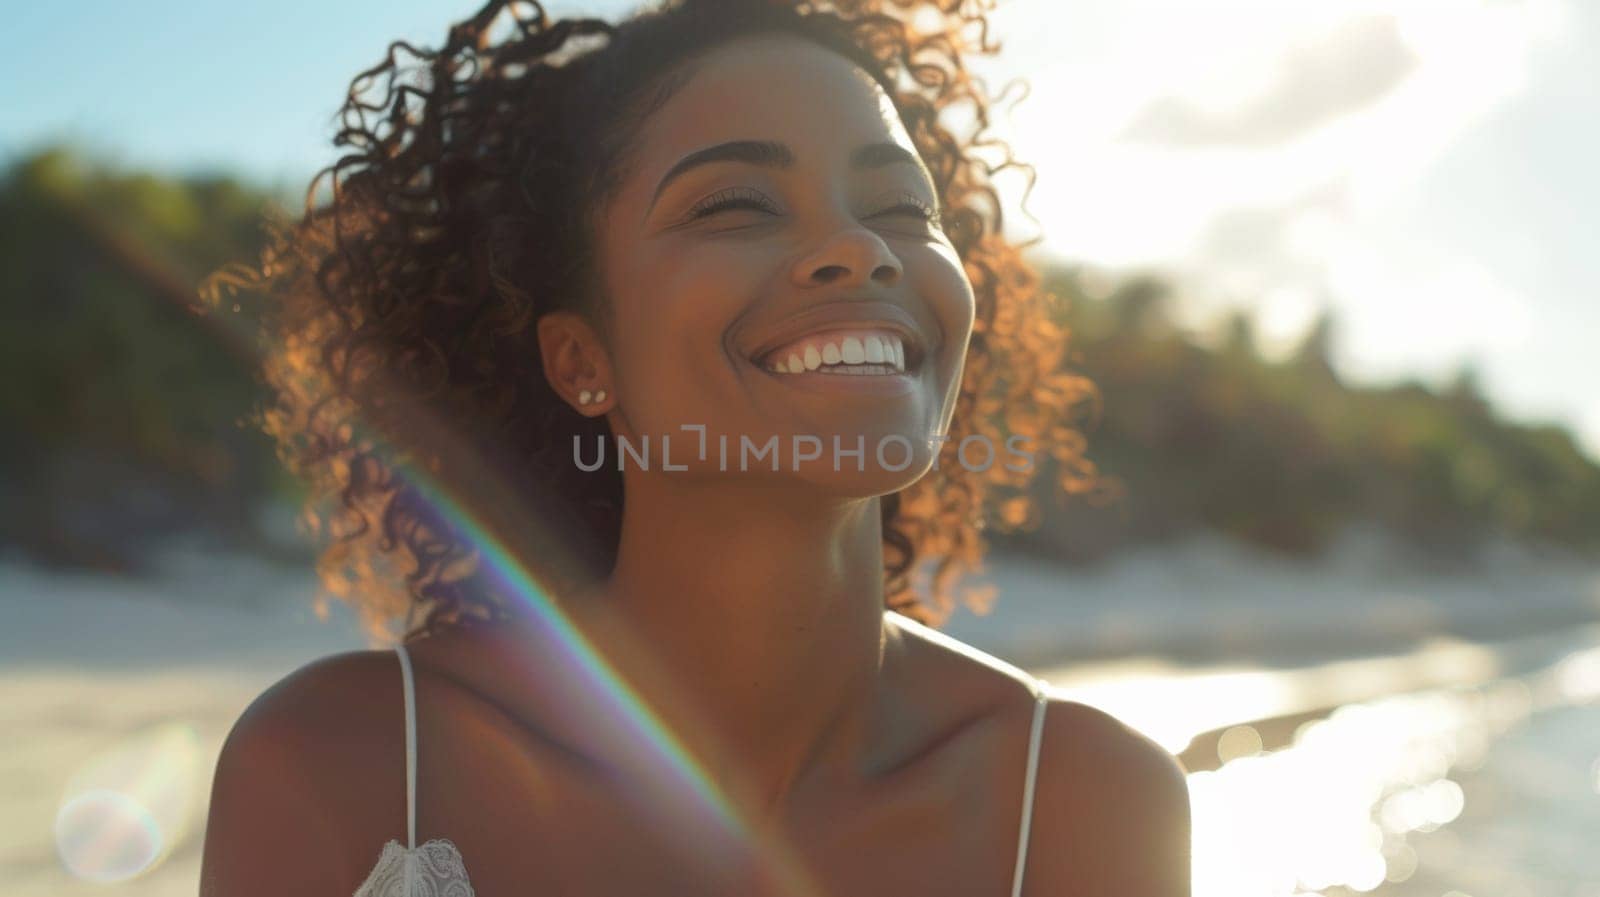 A woman with curly hair smiling at the camera on a beach